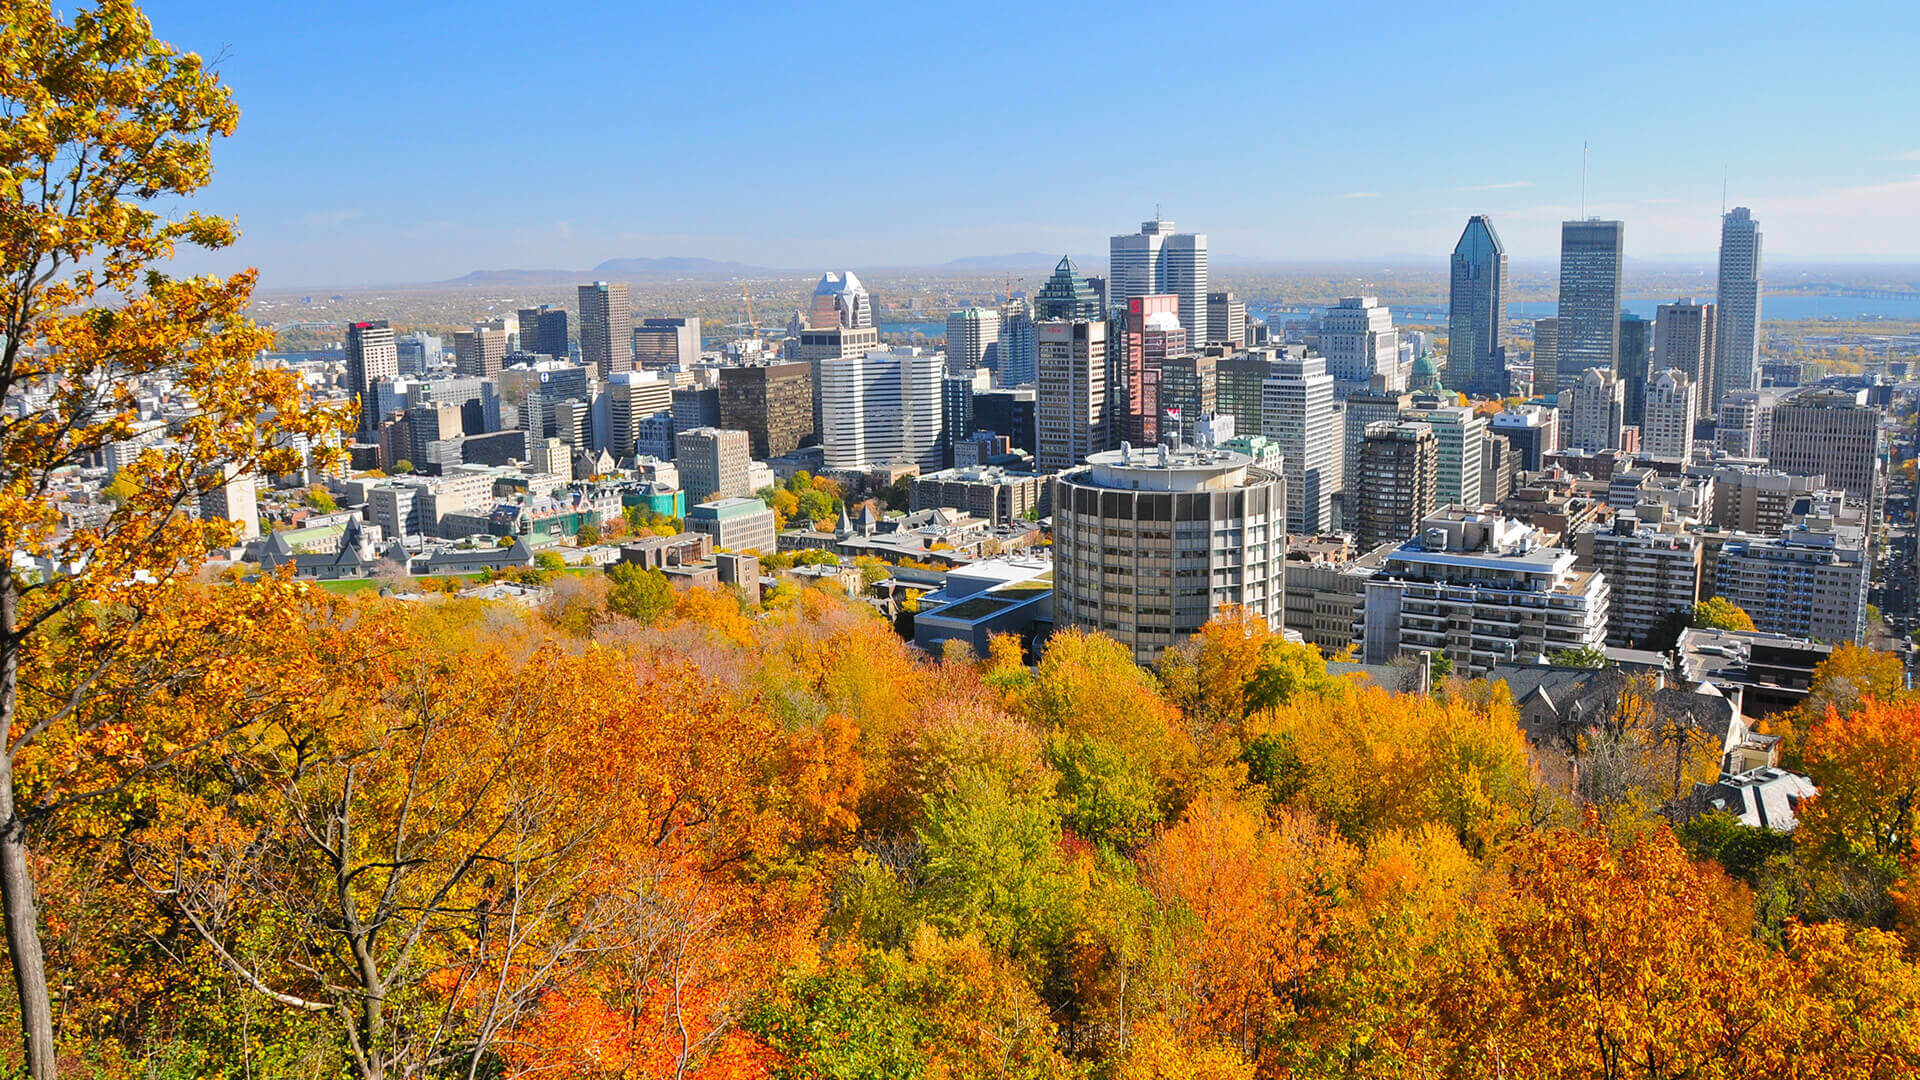 Panoramic view of Montreal, Quebec, with skyscrapers surrounded by vibrant autumn foliage.